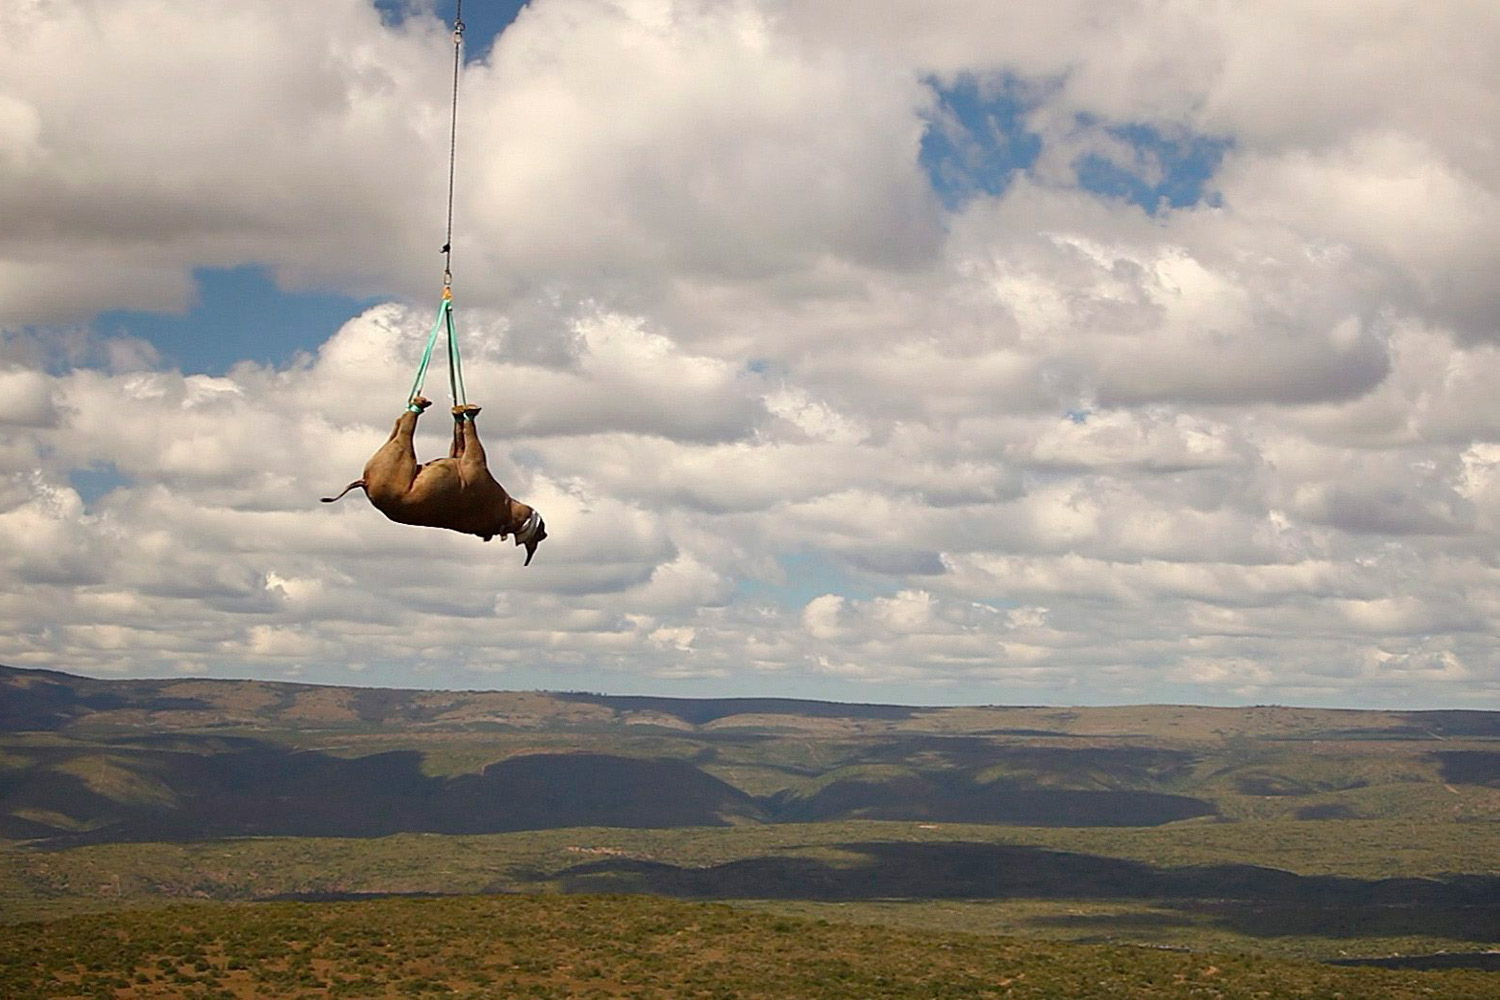 November 8, 2011. A sedated black rhino is carried by military helicopter away from a poaching area in the hills of the Eastern Cape in South Africa to a new home 15 miles away. The World Wildlife Fund organized the move of 1,000 rhinos, which are under threat from poachers across Africa because of the market value of their horns.